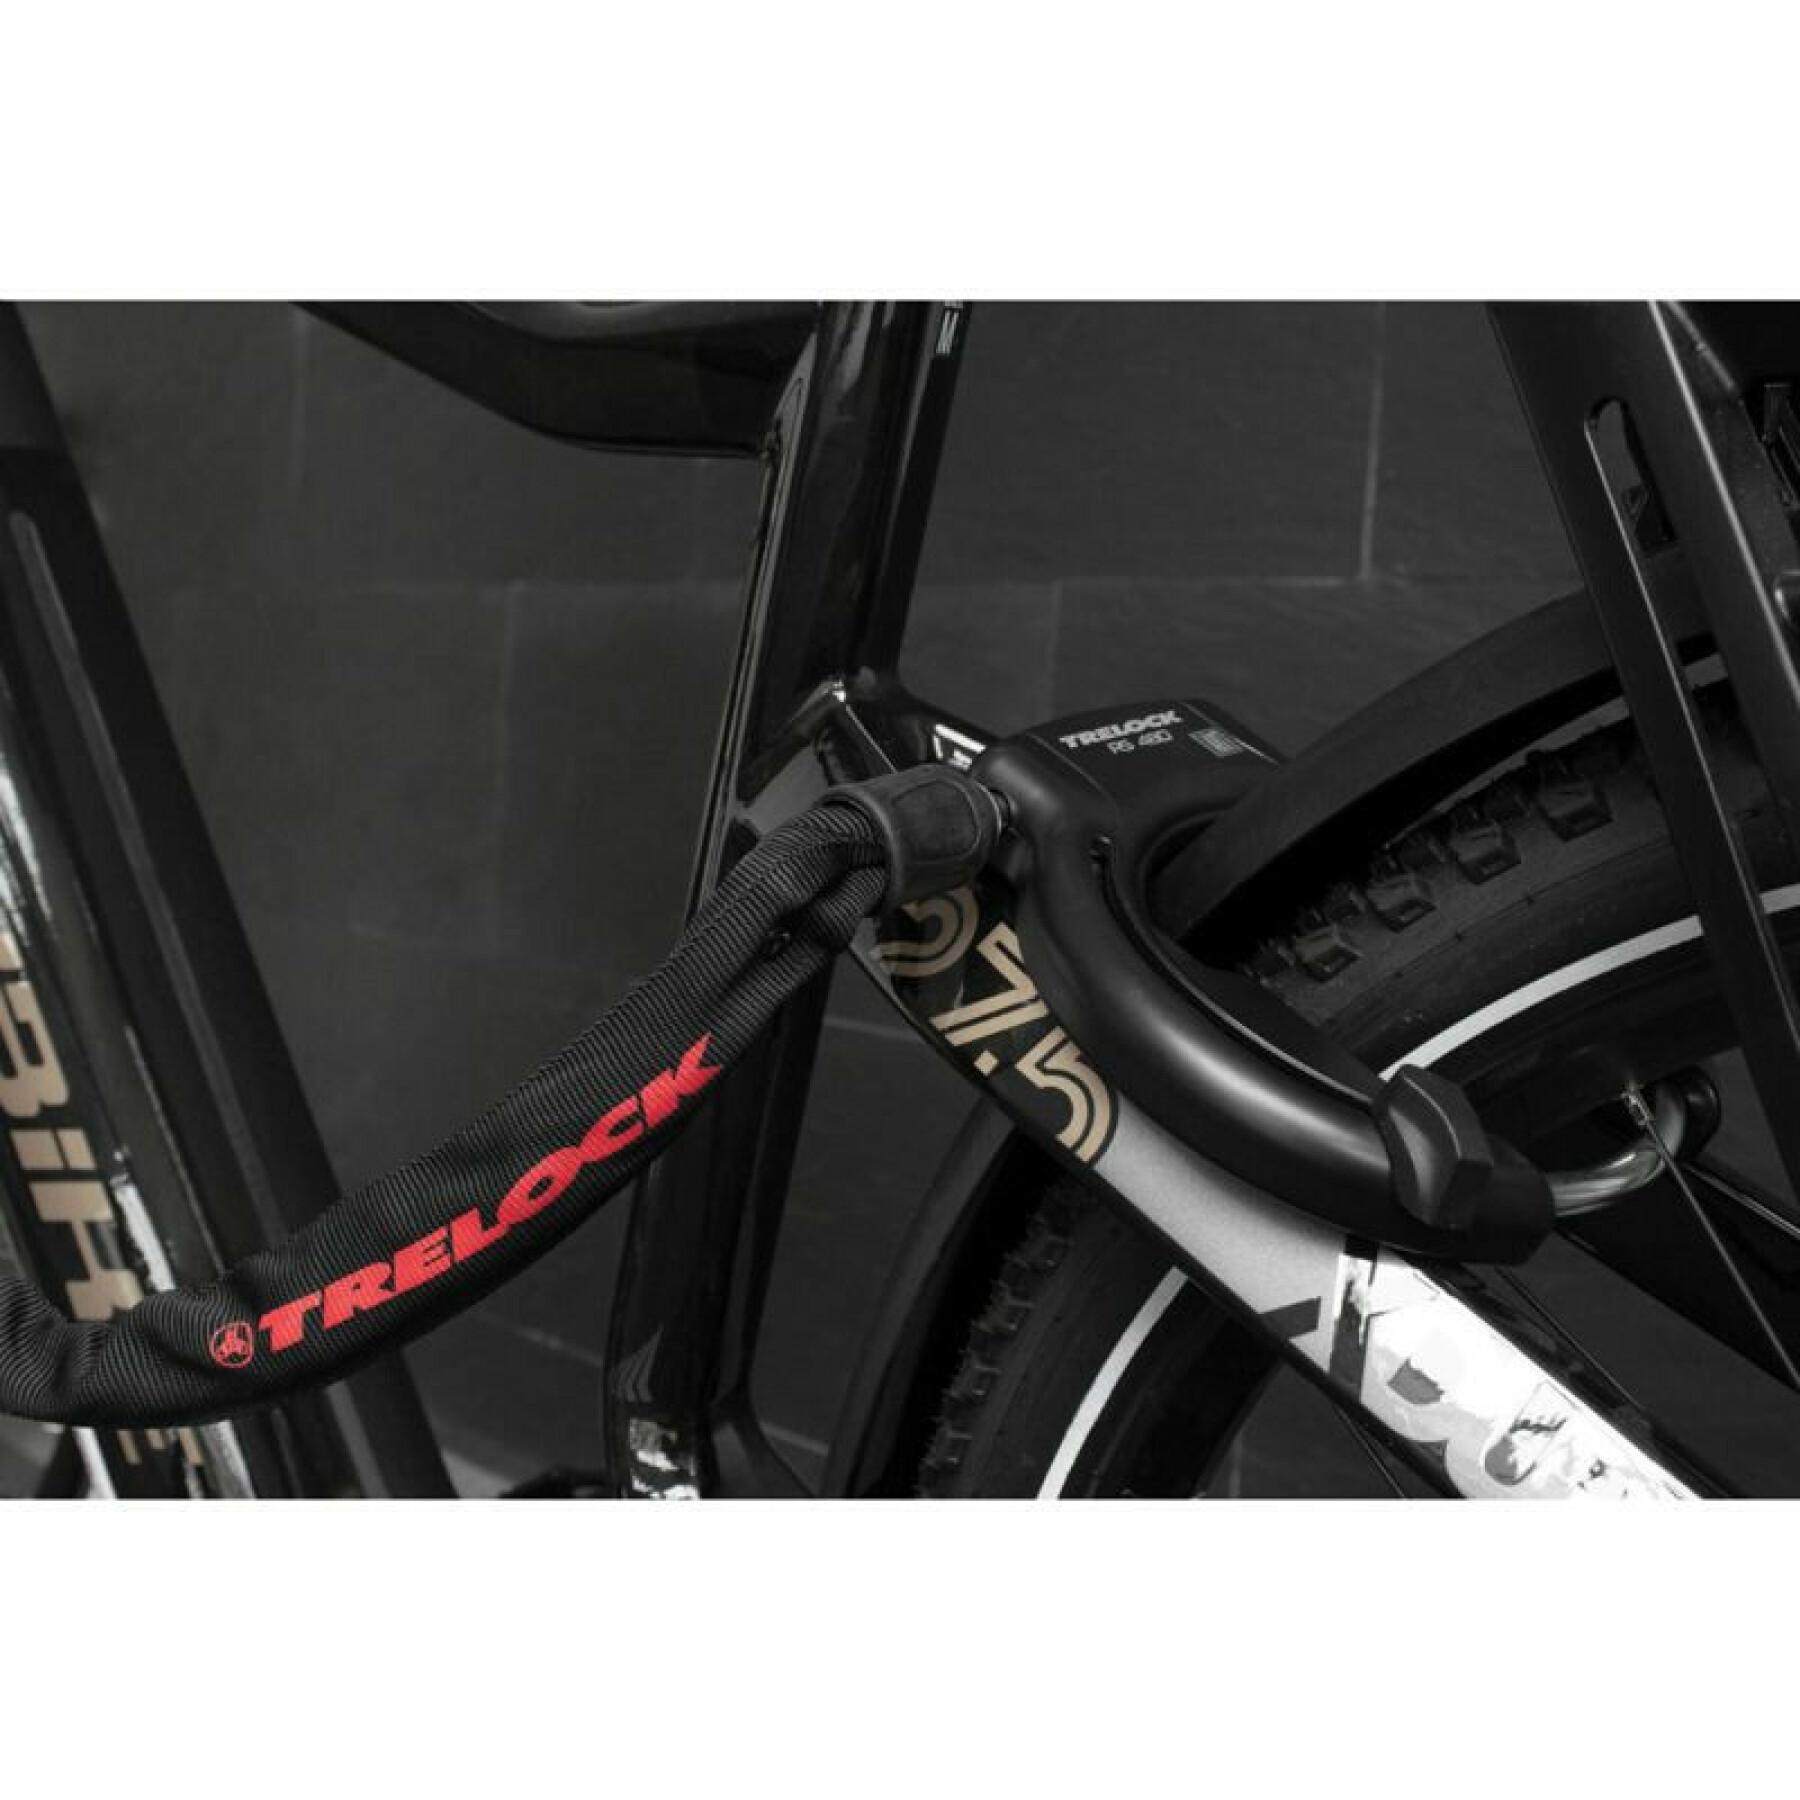 Horseshoe bicycle frame lock with frame mounting width from 89 mm to 112 mm (tire spacing 75 mm) Trelock RS480